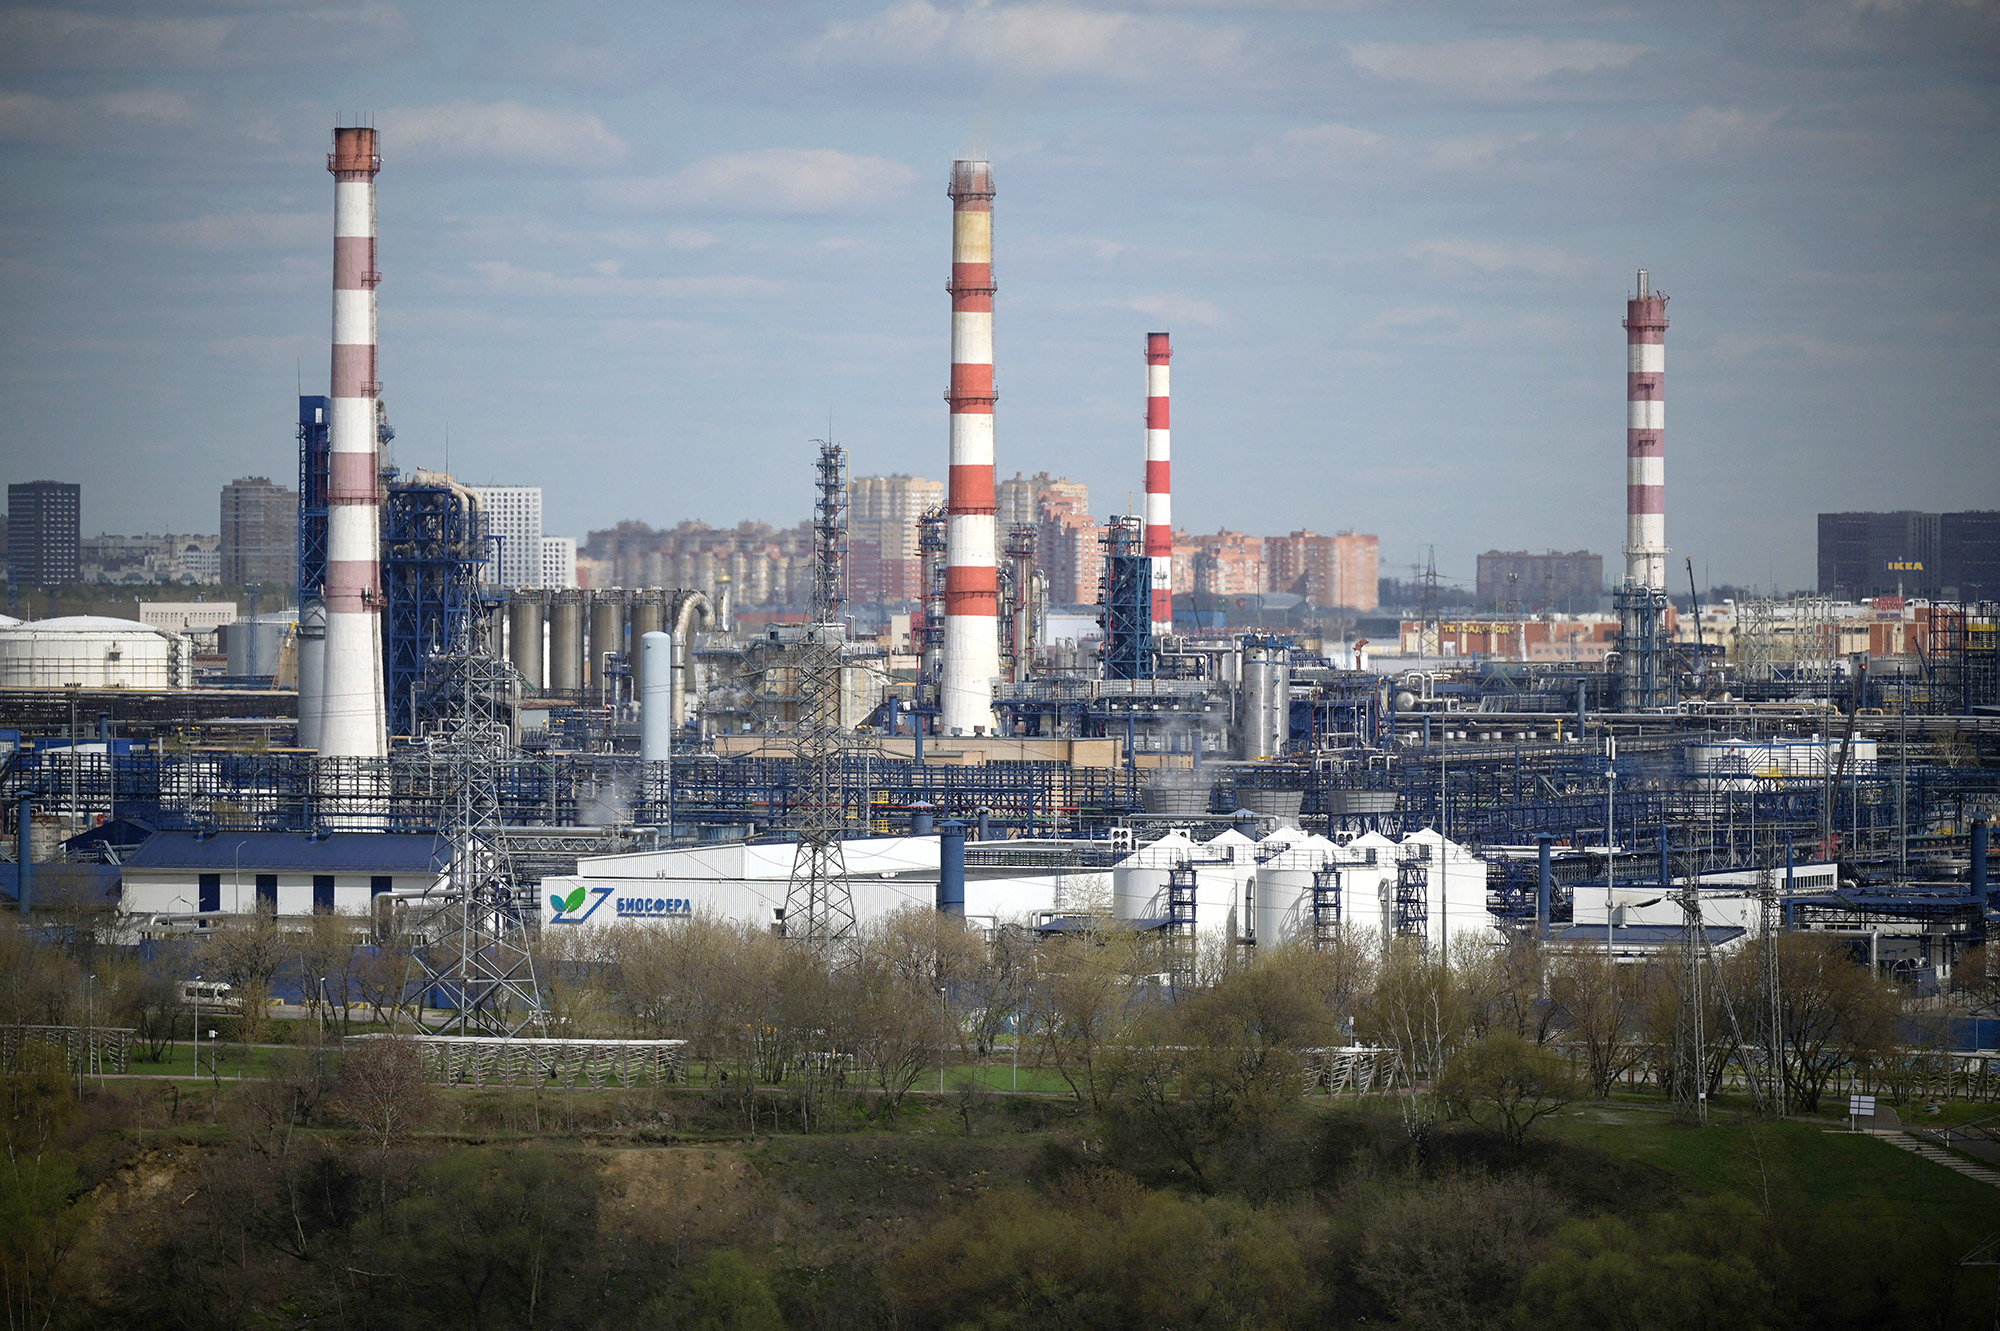 The Russian oil producer Gazprom Neft's Moscow oil refinery on the south-eastern outskirts of Moscow, Russia, on April 28, 2022. 